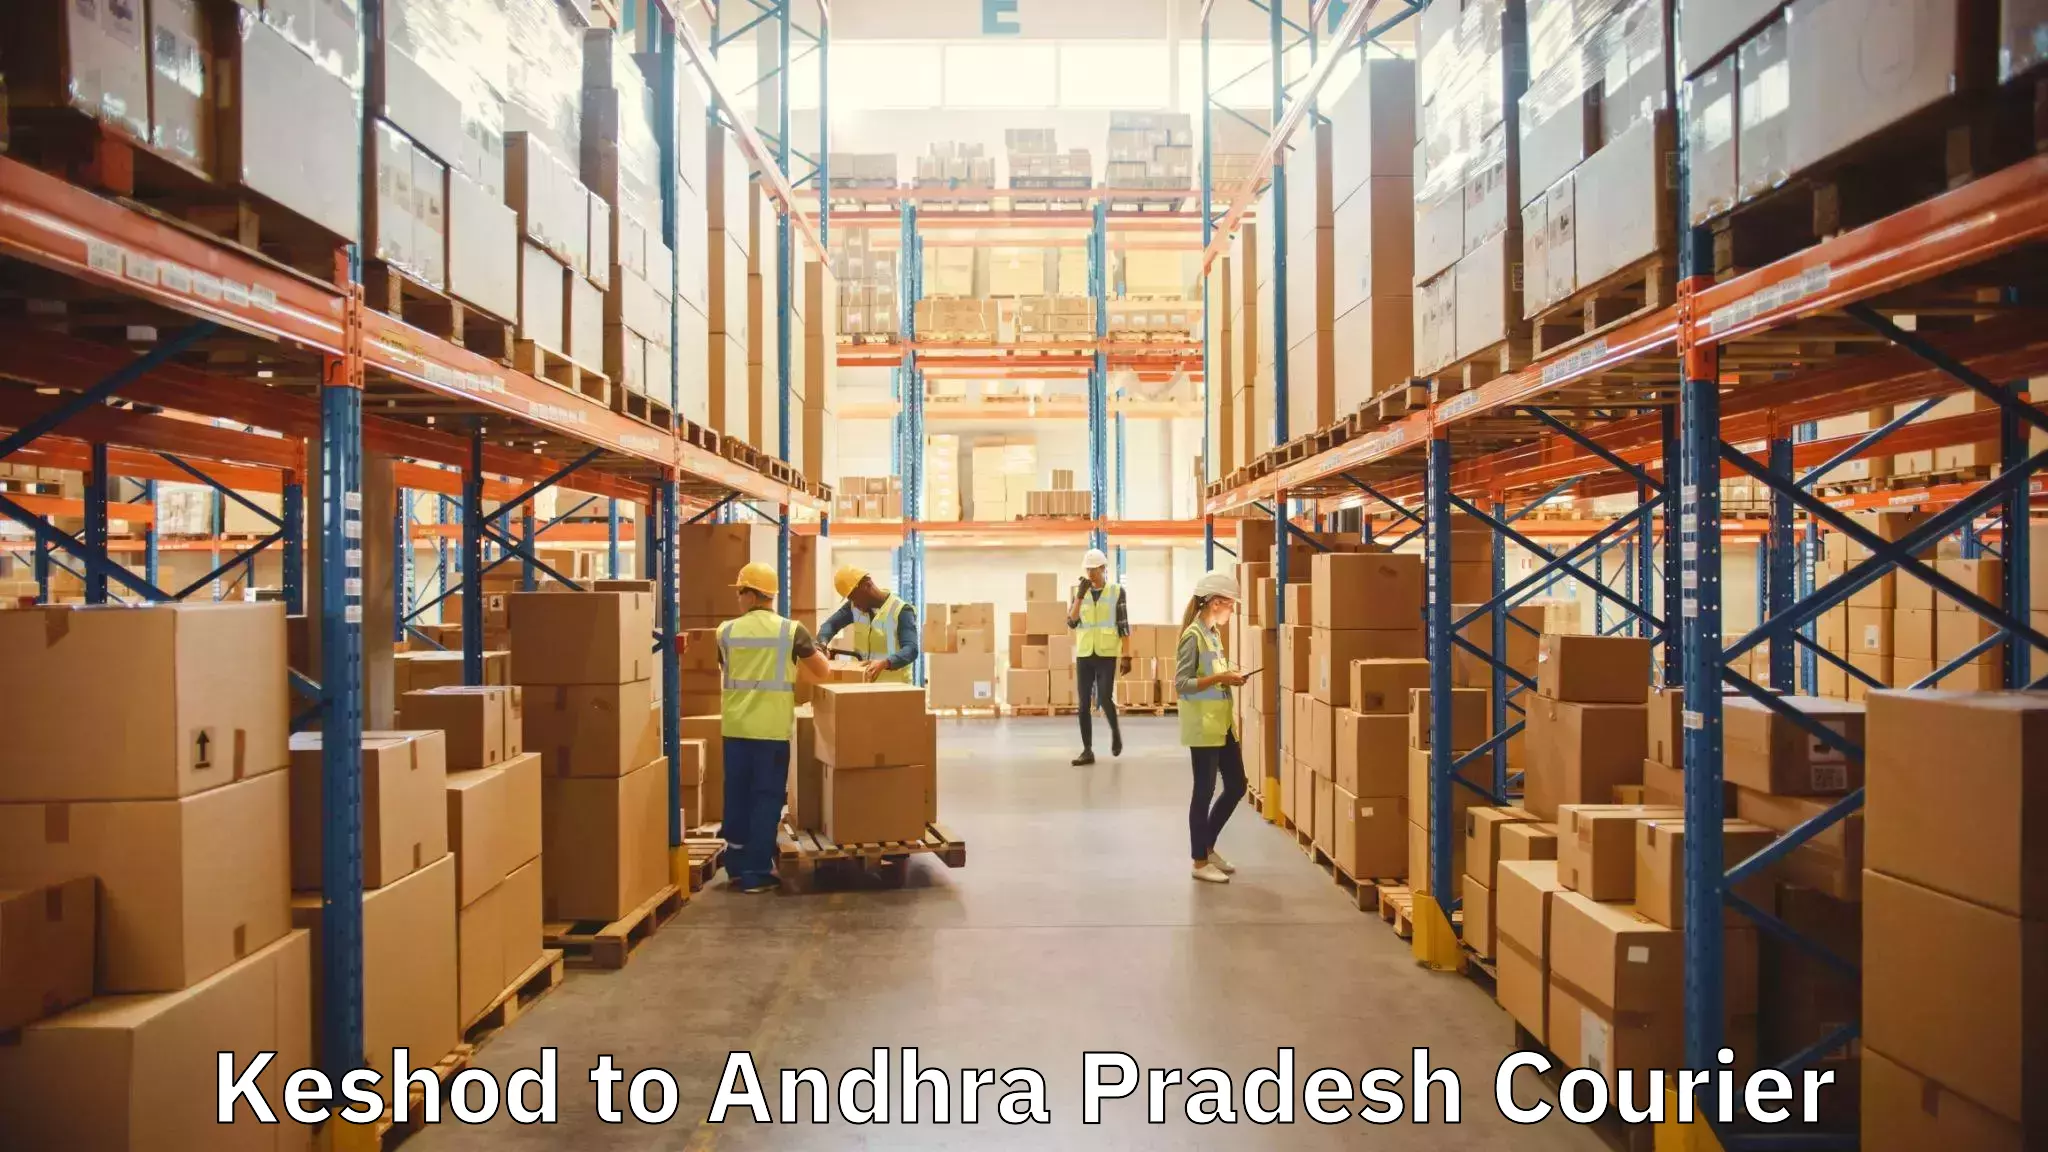 Professional packing and transport in Keshod to Visakhapatnam Port